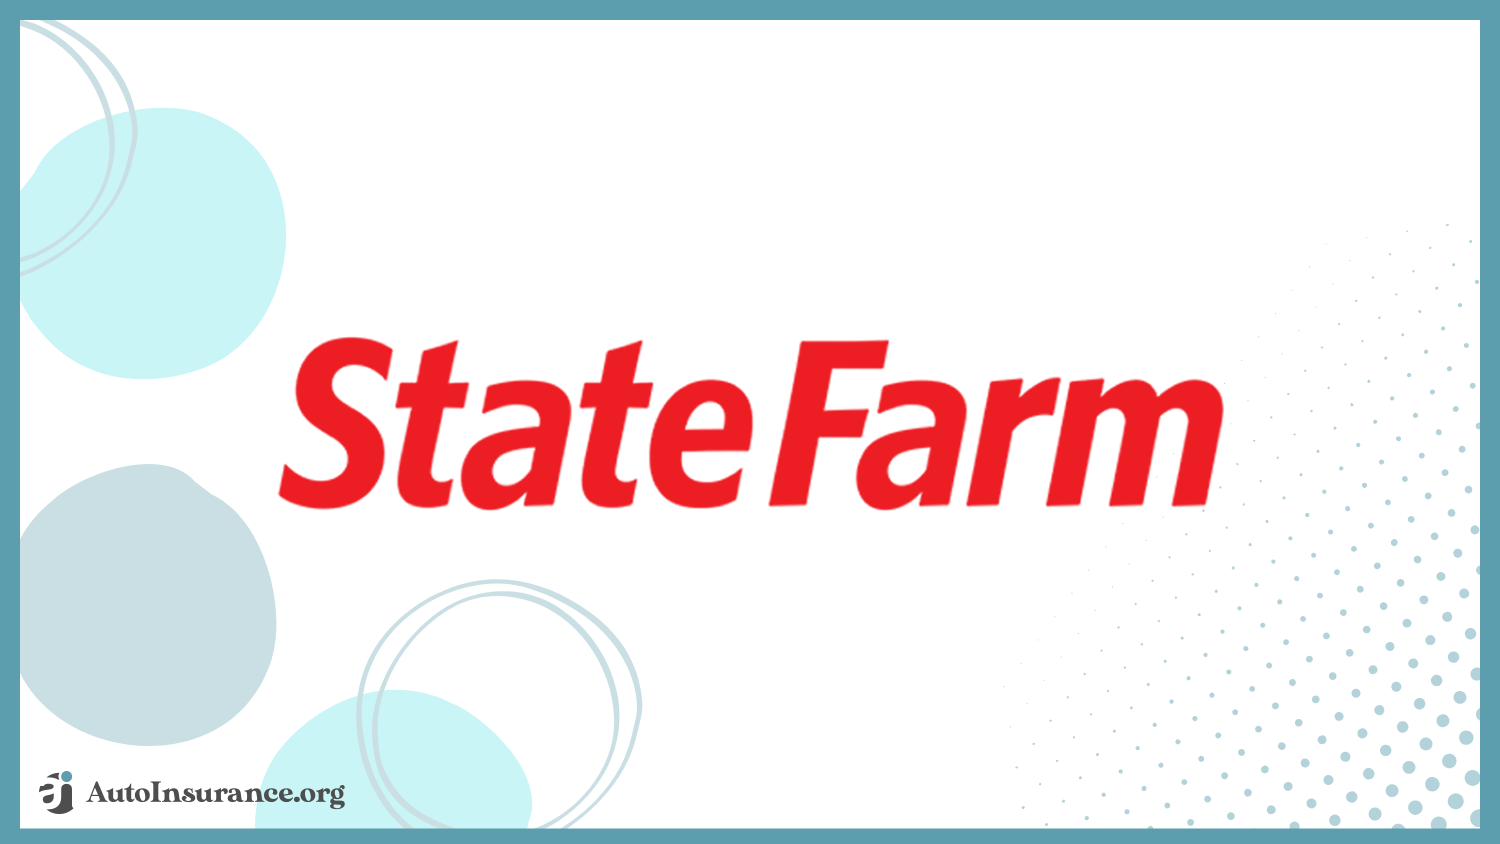 State Farm: Best Auto Insurance Companies That Don't Check Accidents Reported by CARFAX